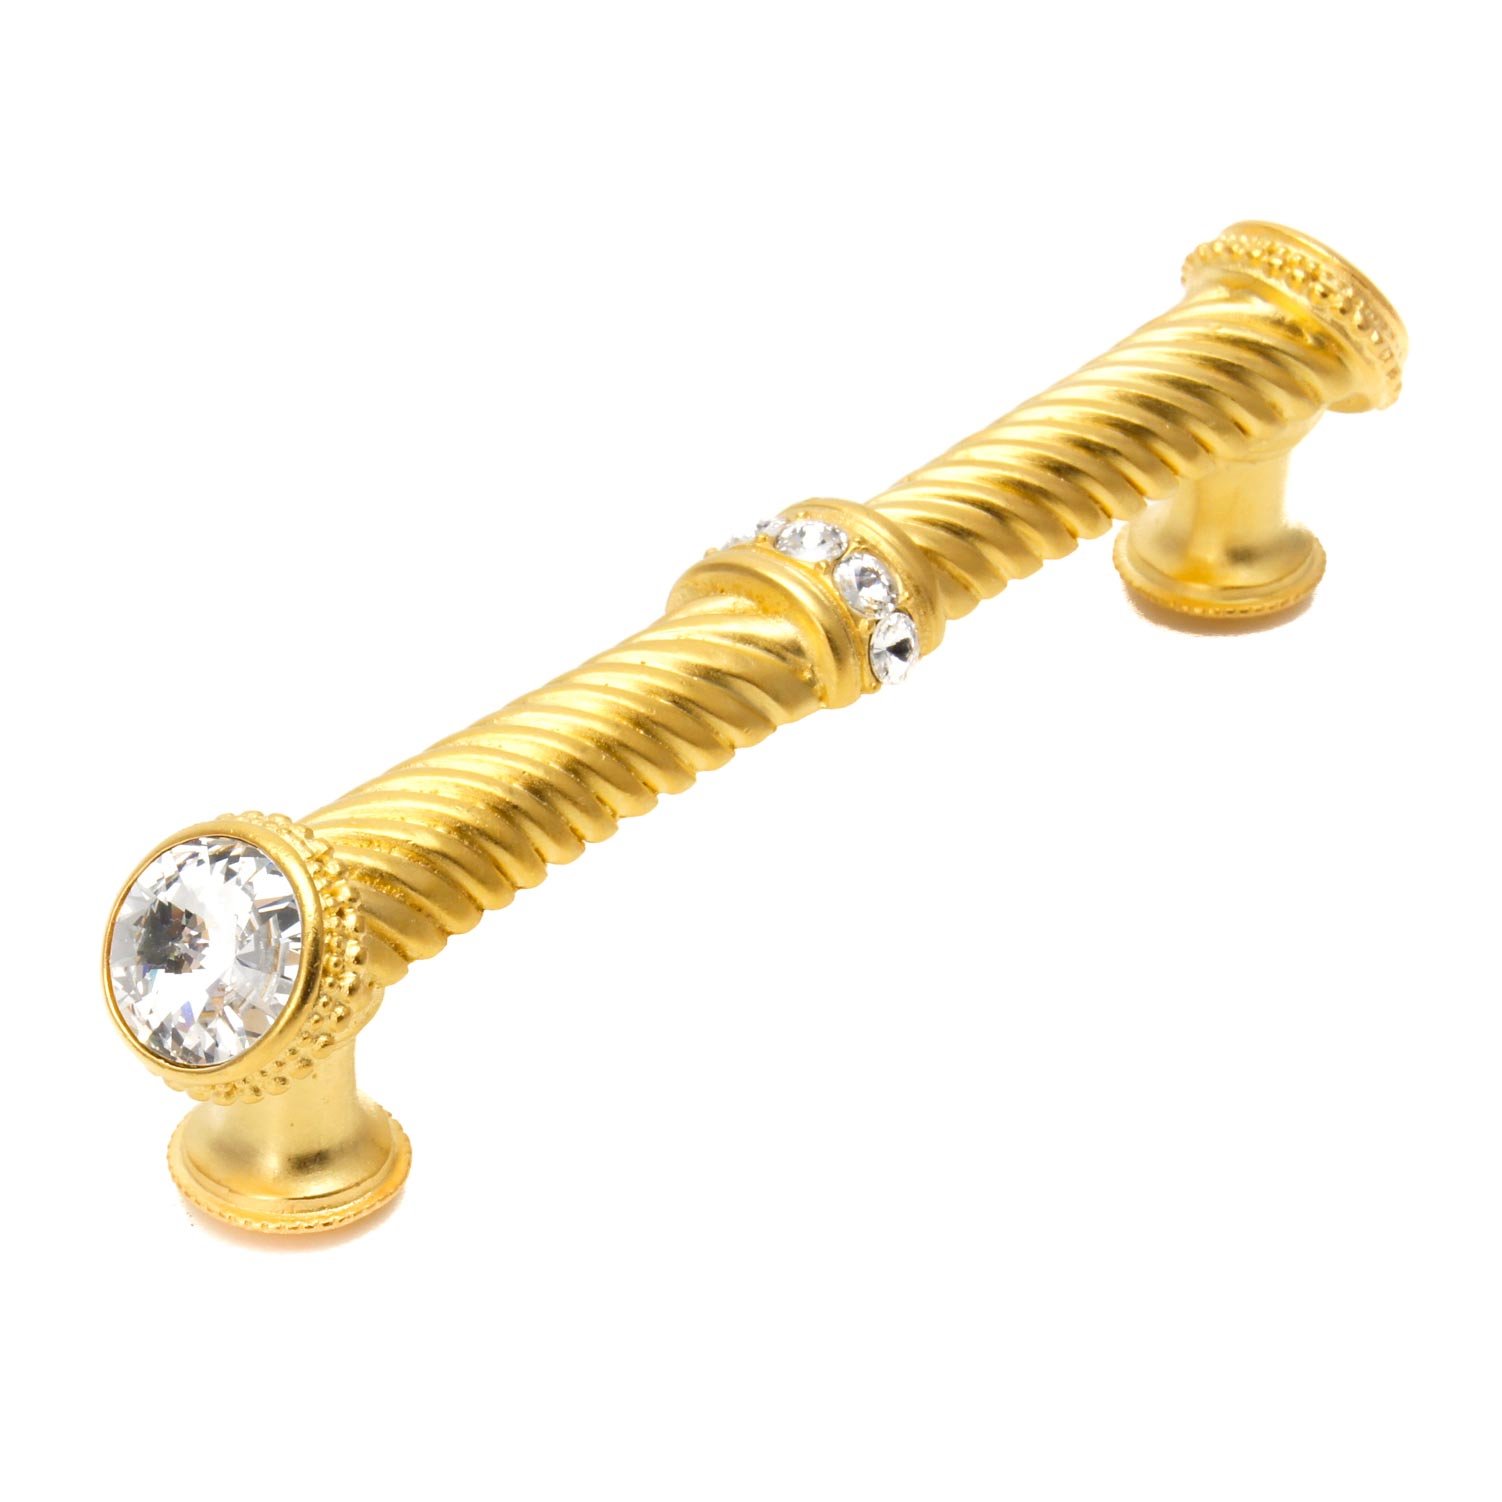 Caché 5" Centers Large Pull With End & Center Swarovski Crystals in Antique Brass with Aquamarine